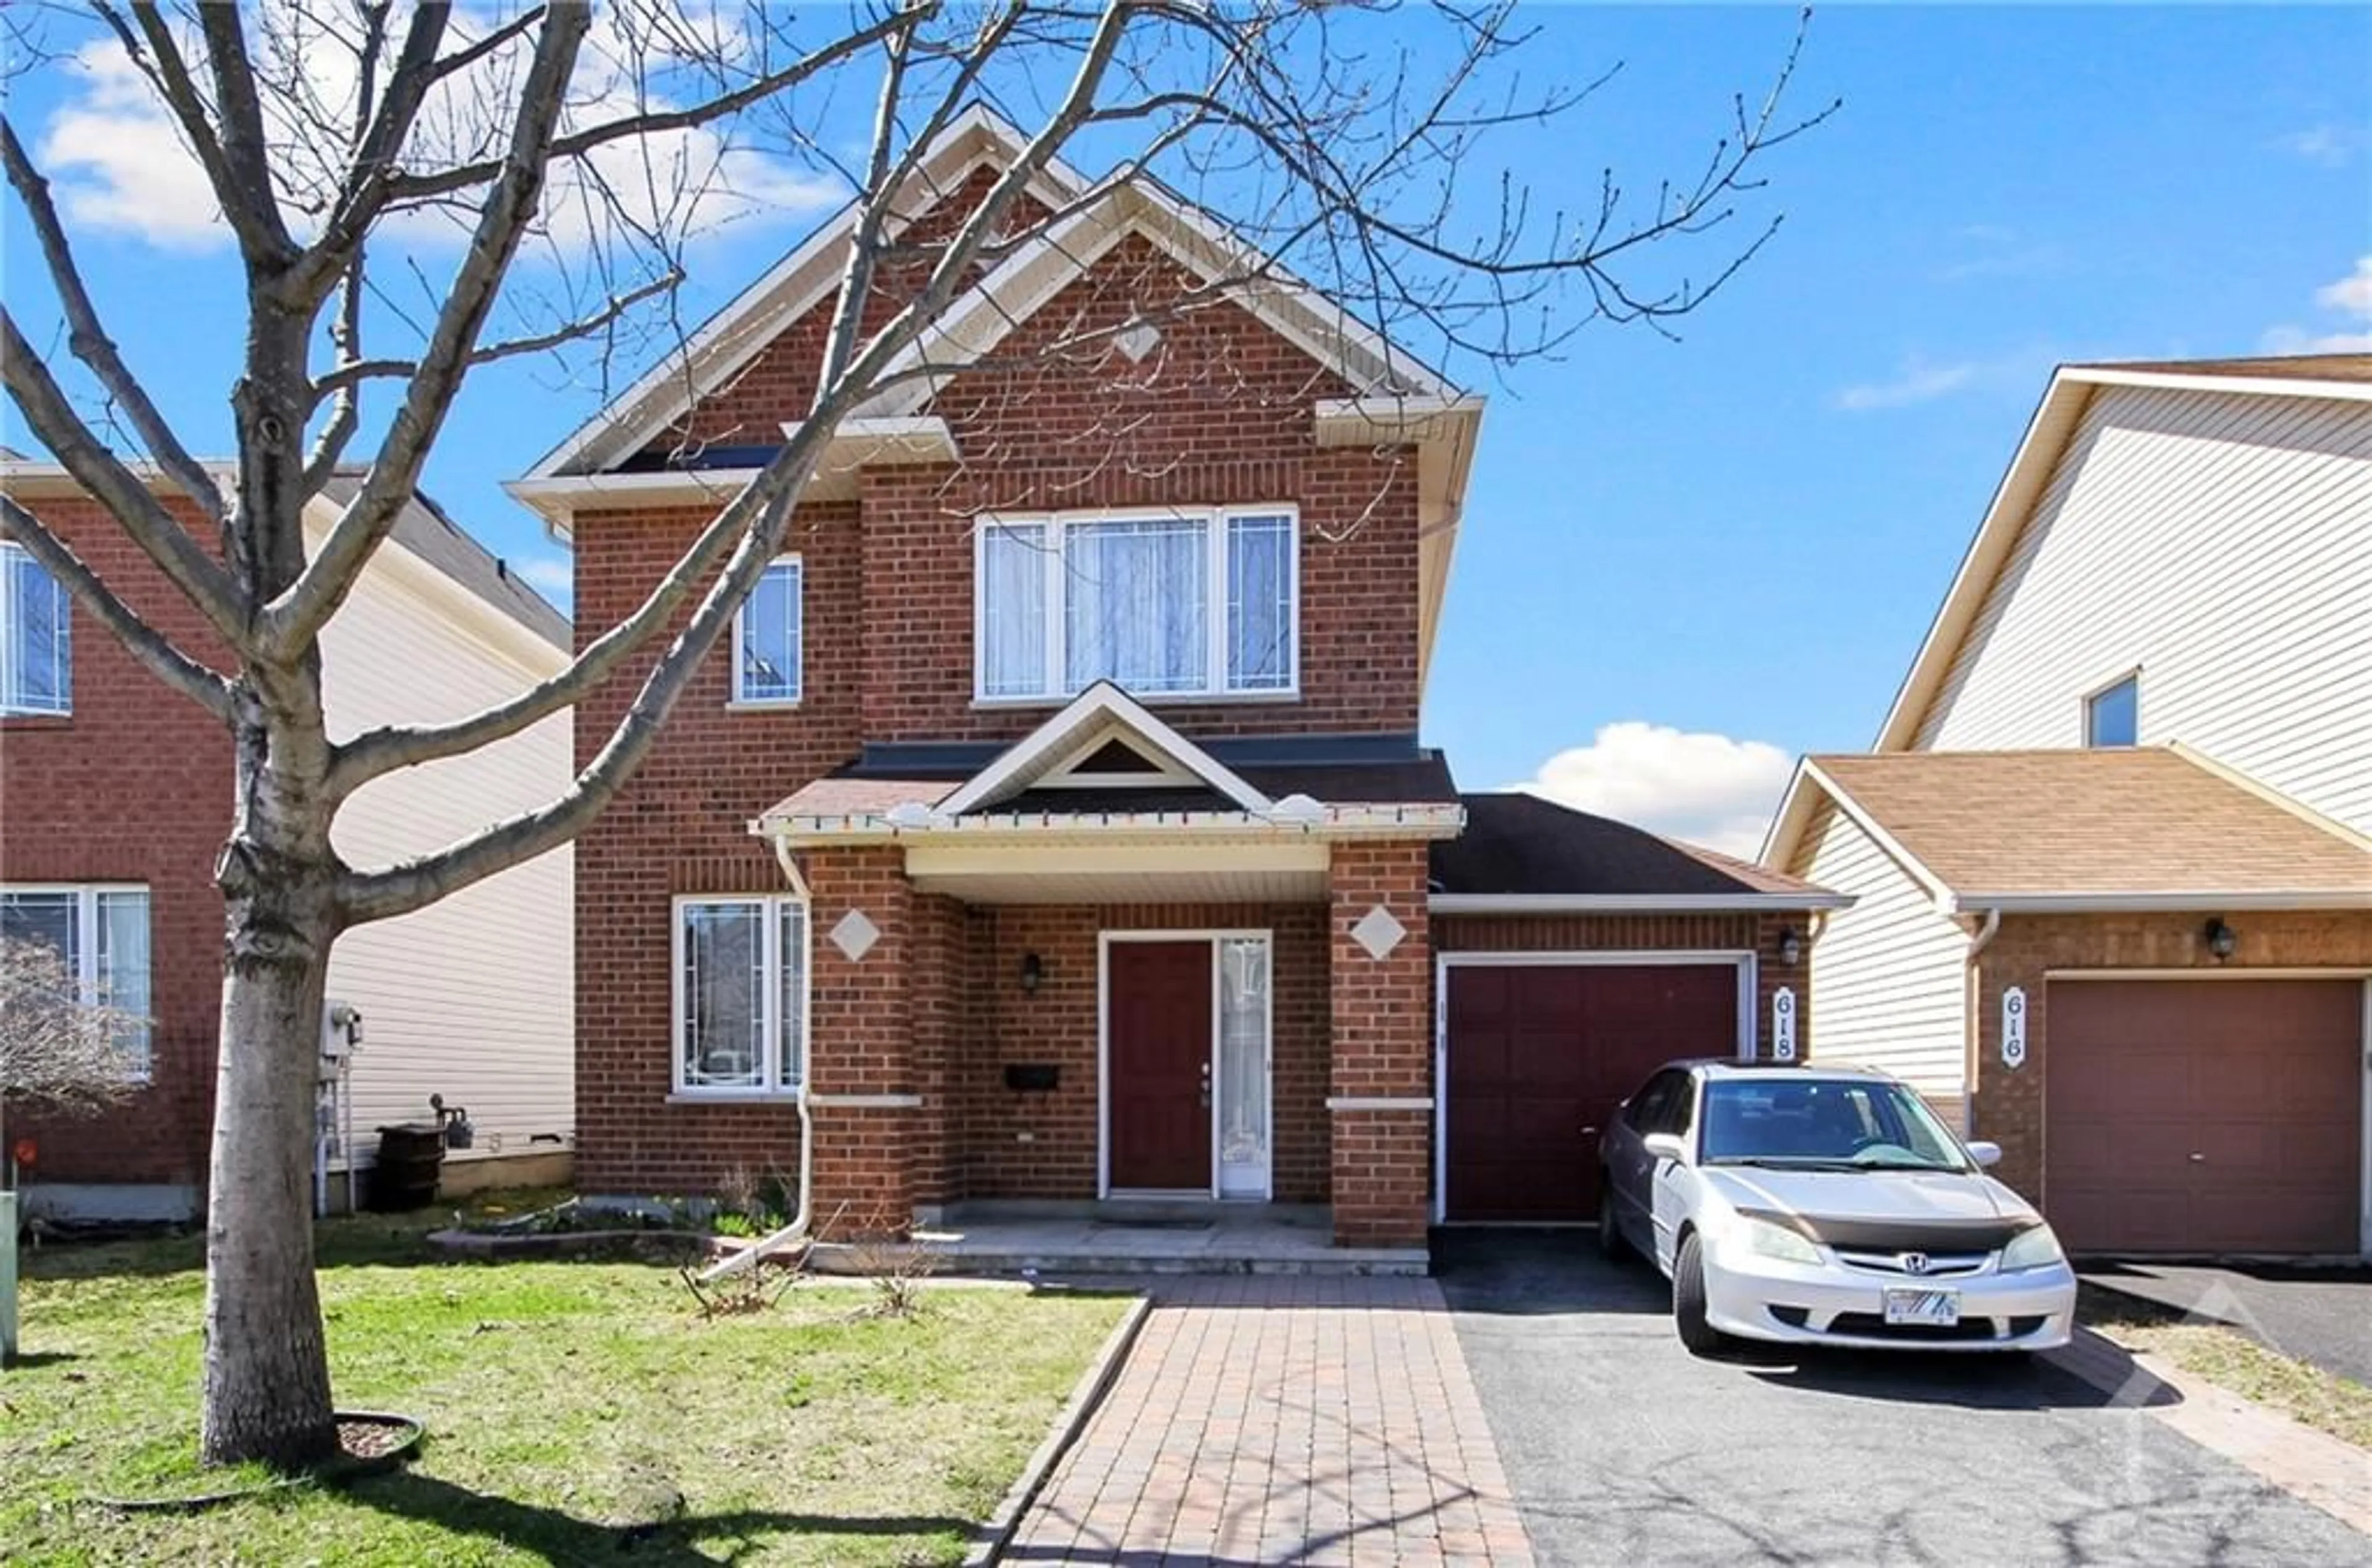 Home with brick exterior material for 618 BEATRICE Dr, Ottawa Ontario K2J 5N9